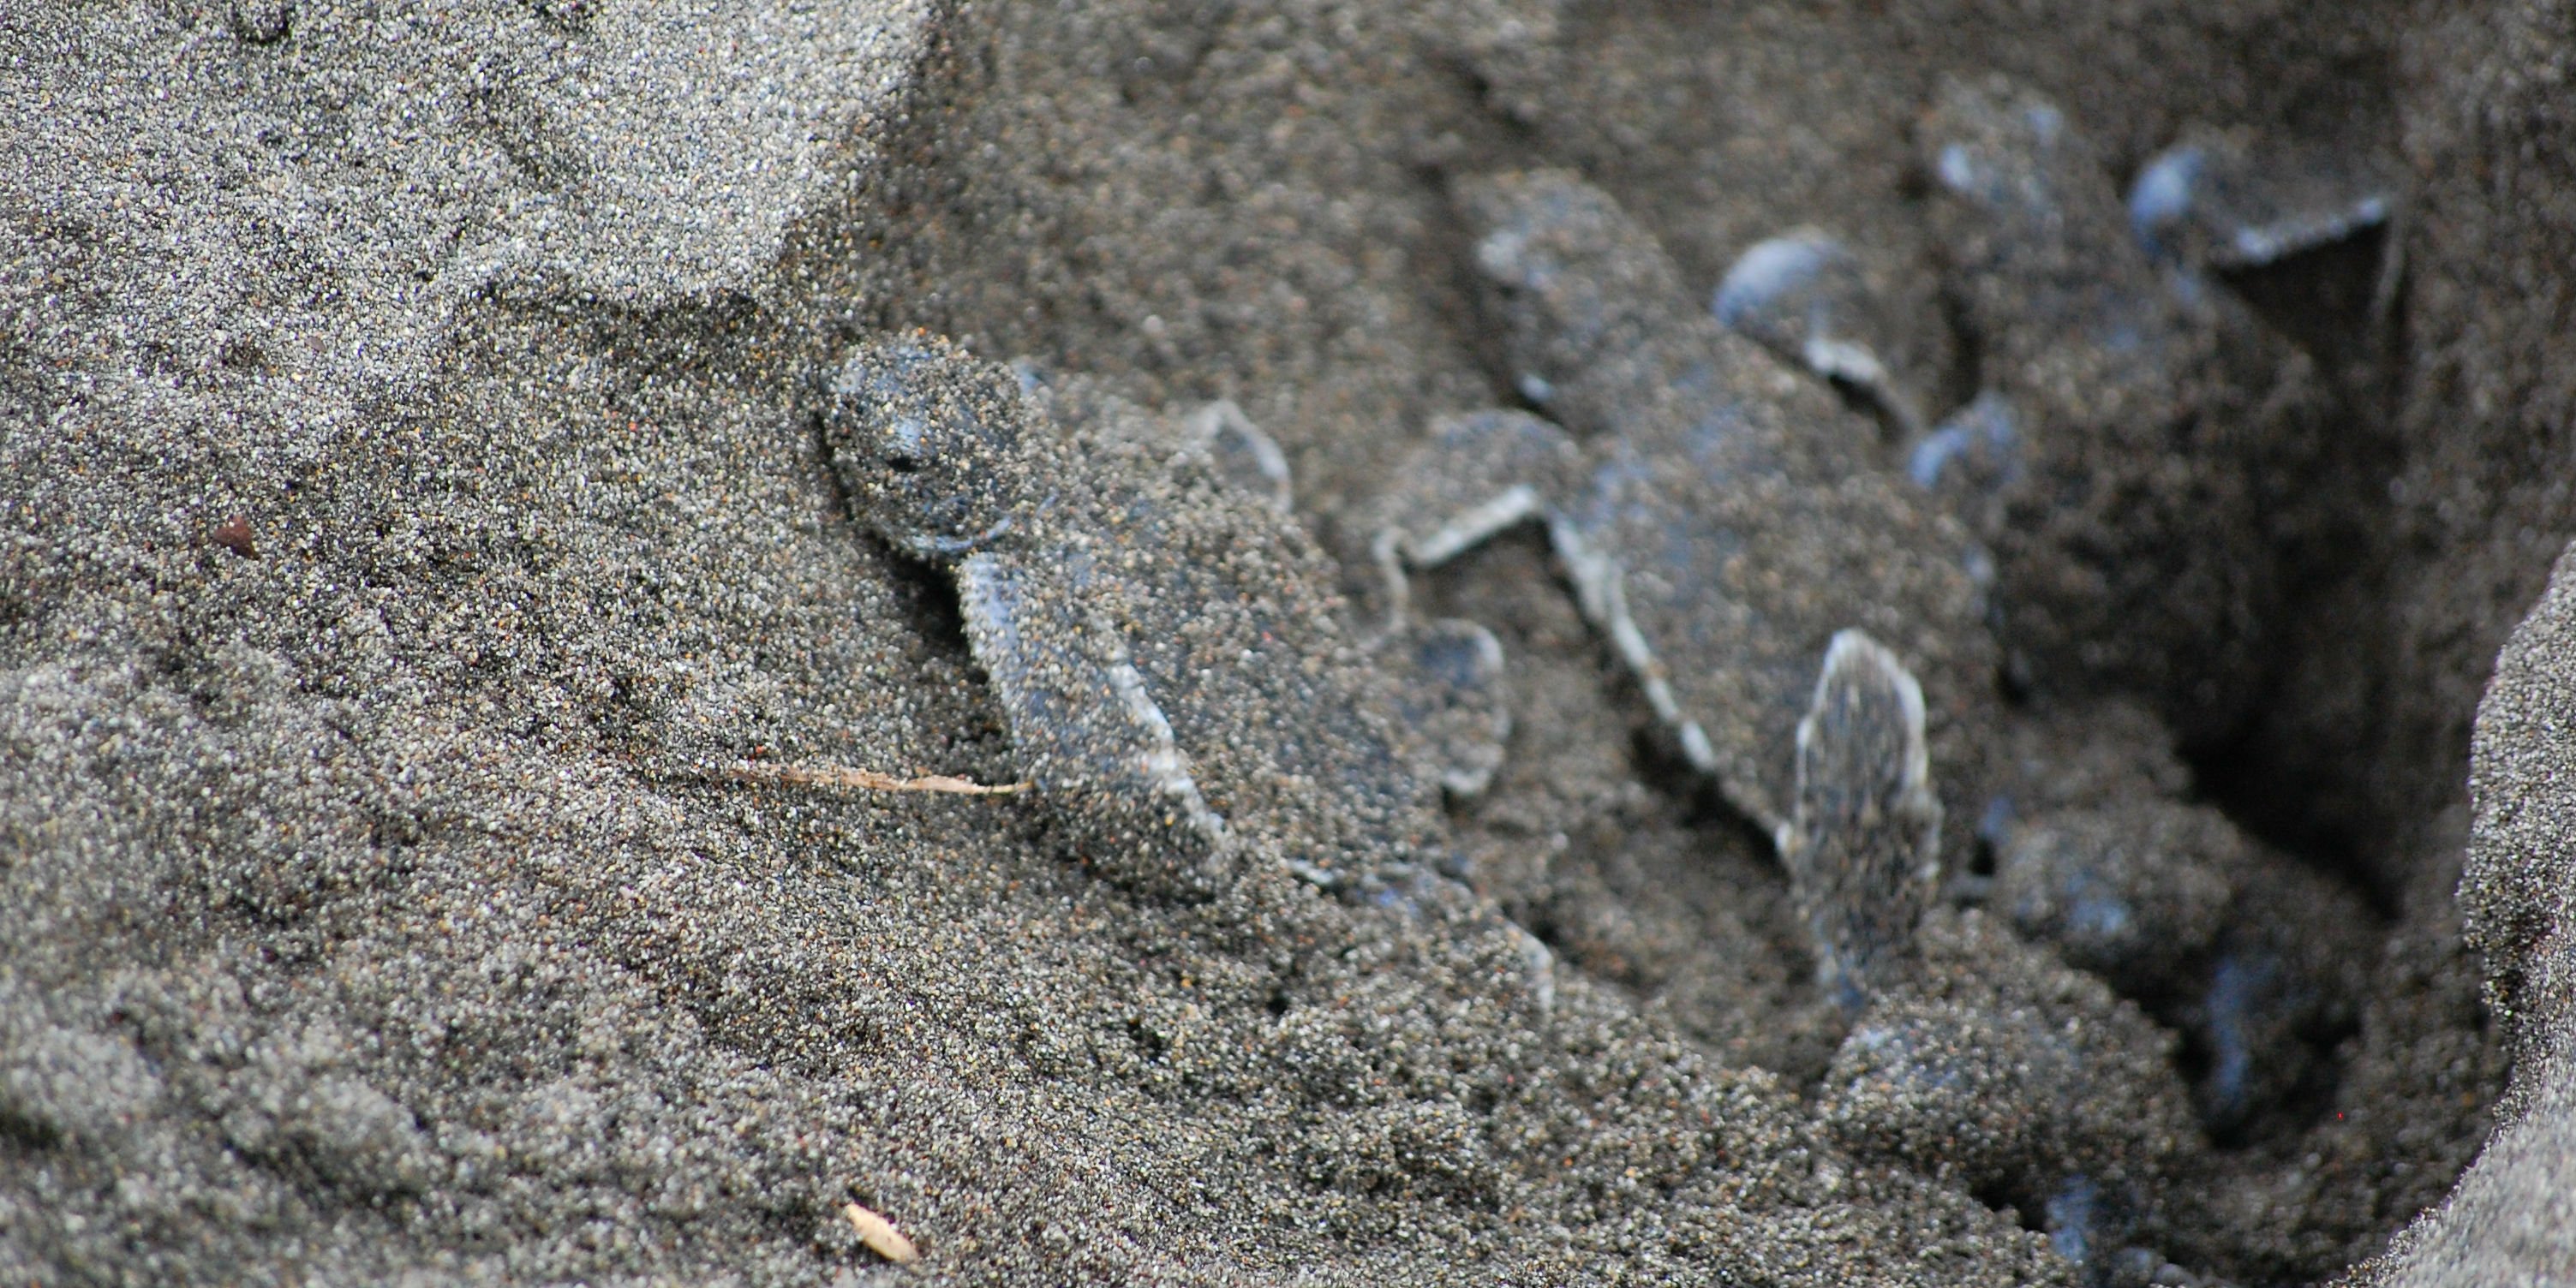 Sea turtle hatchlings climb out of their nest in Costa Rica. Sea turtle conservation volunteers will monitor their progress.